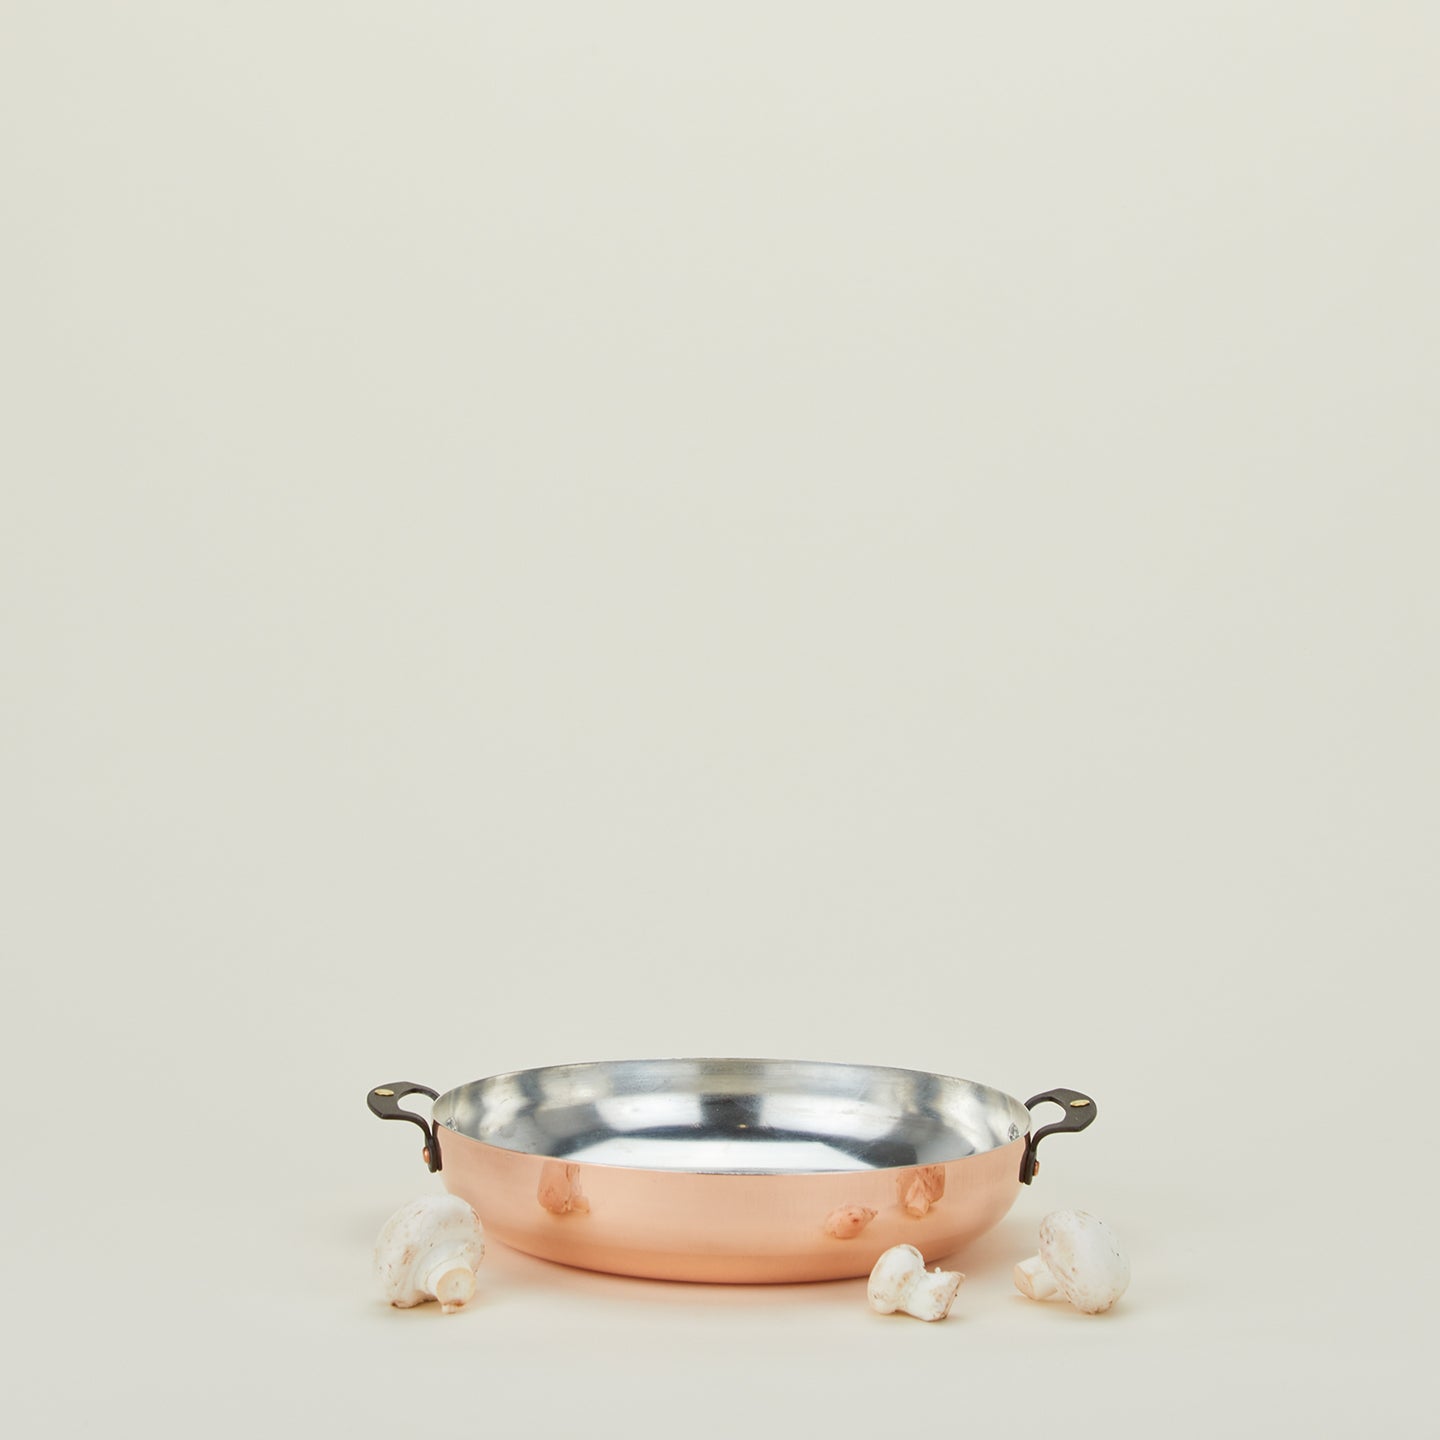 Copper Two Handled Saute Pan, 11"